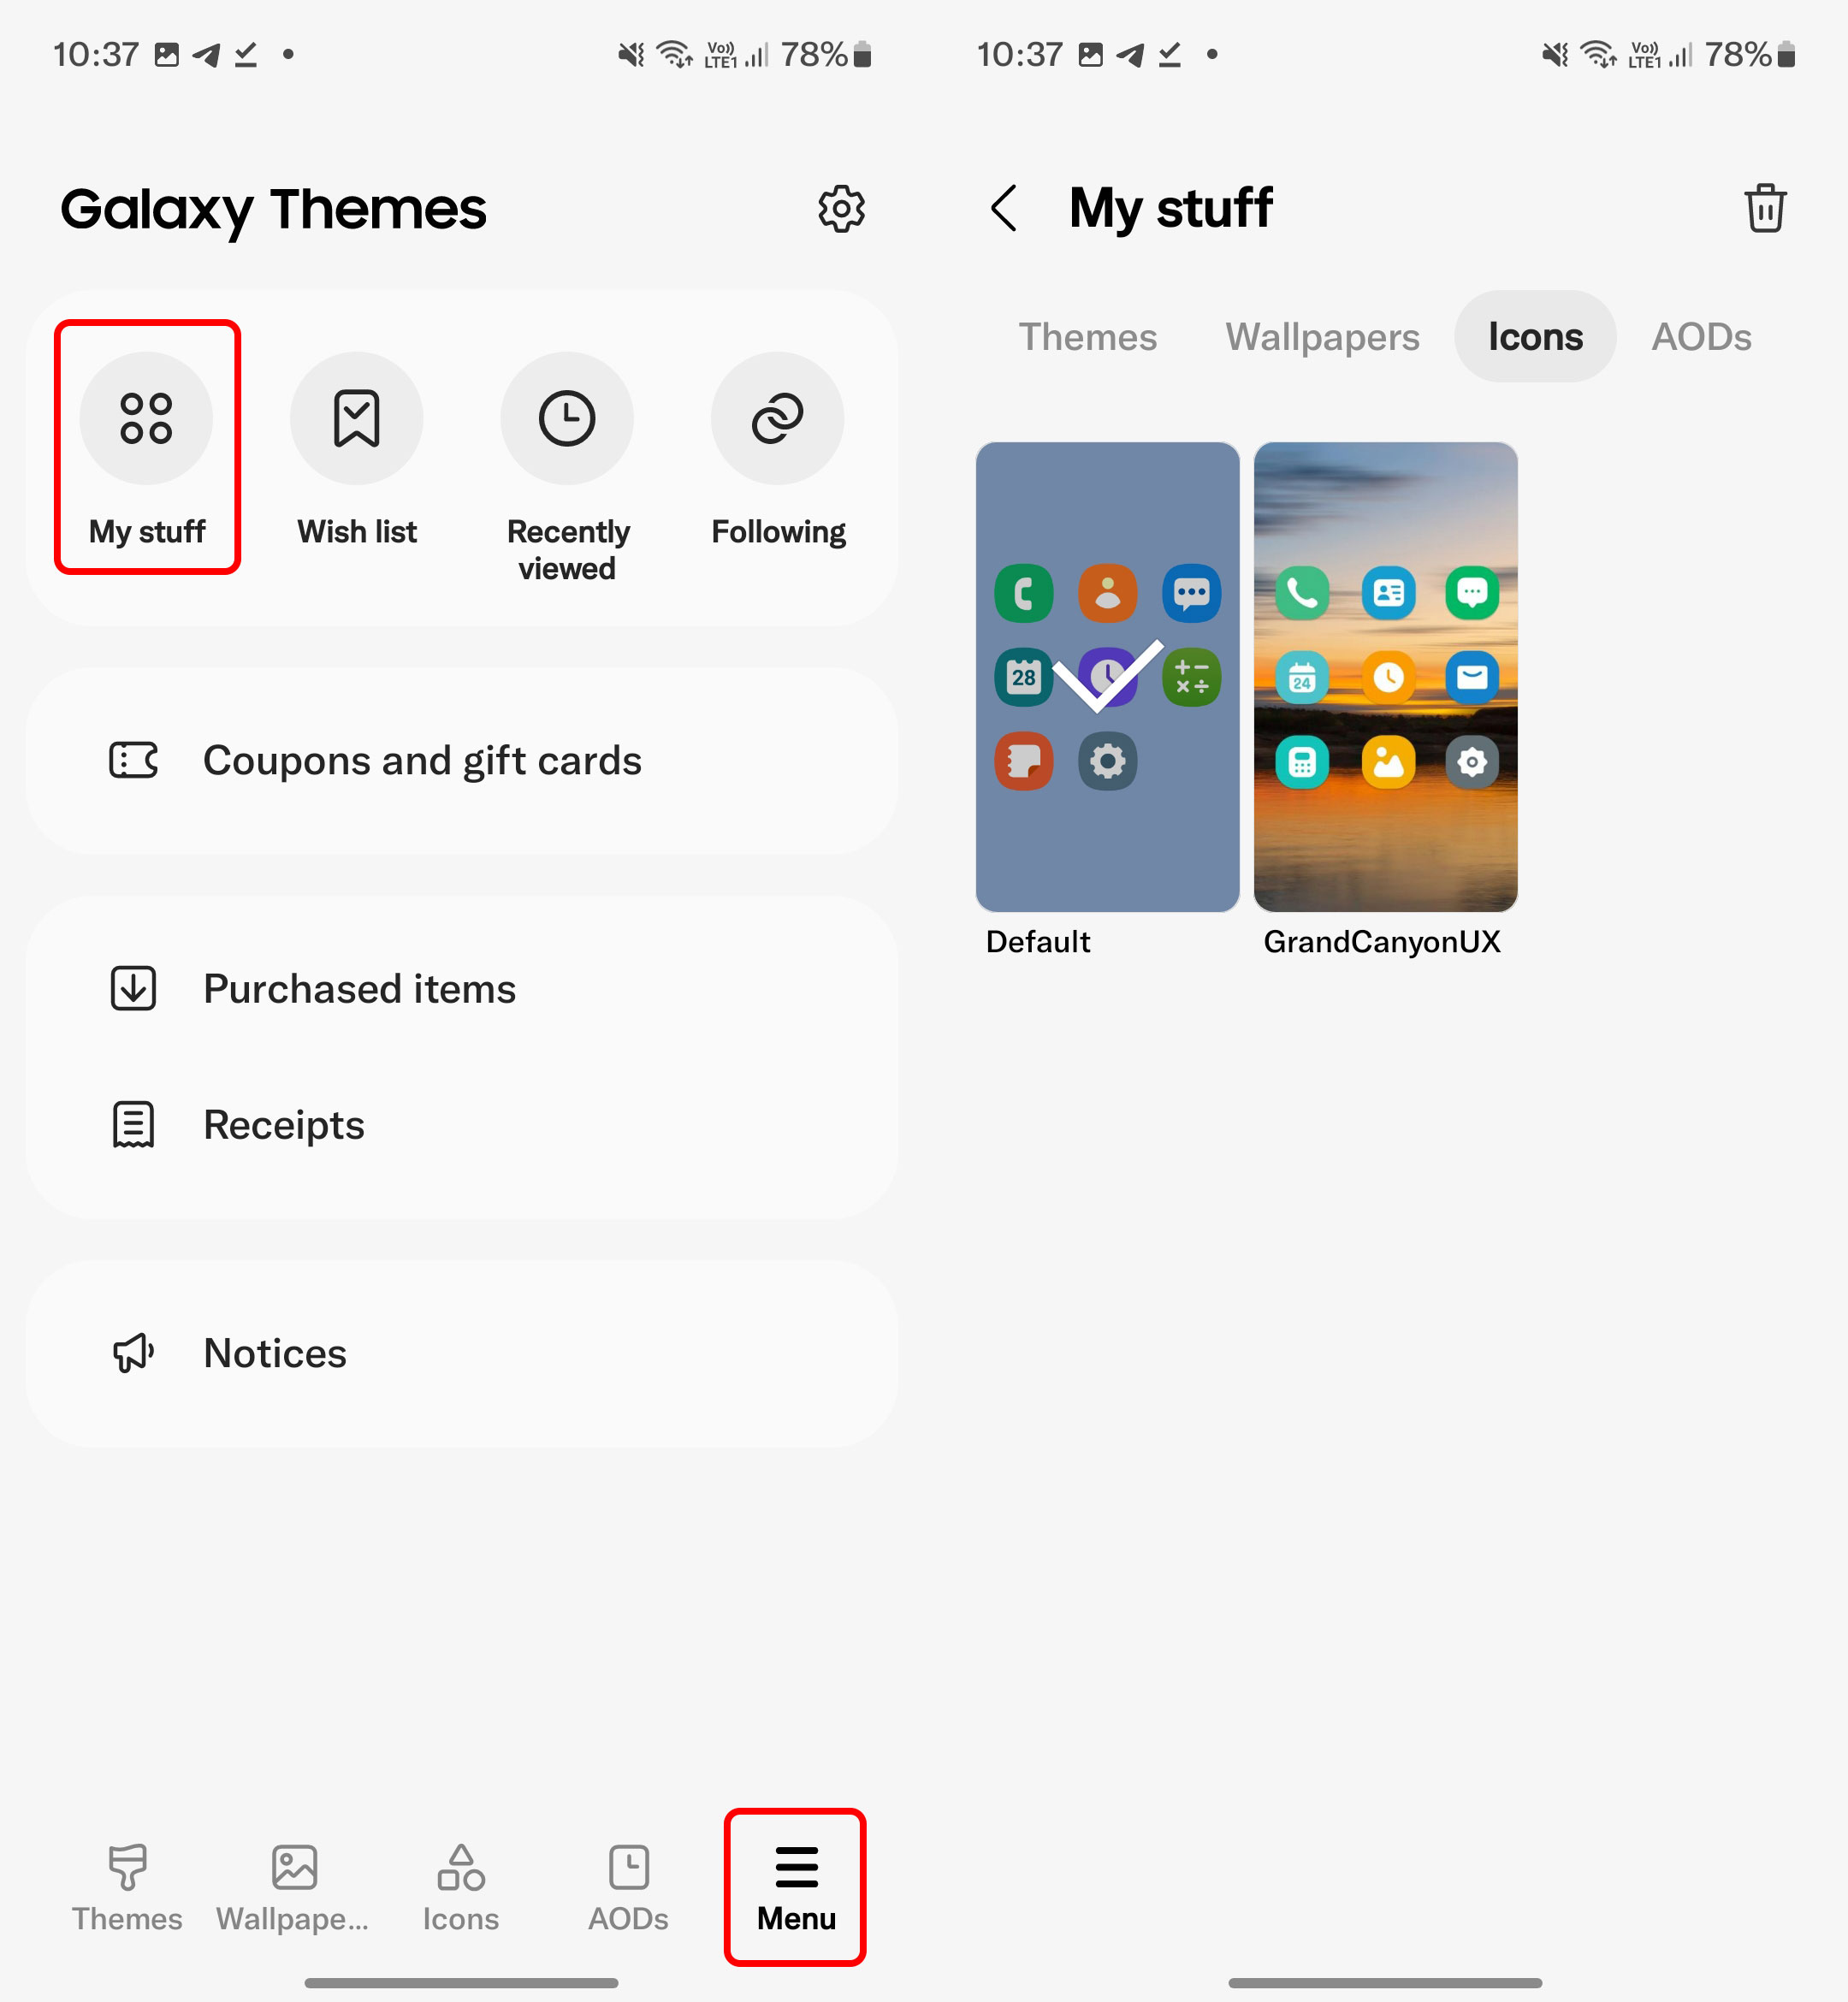 Changing the design of icons on Samsung phones